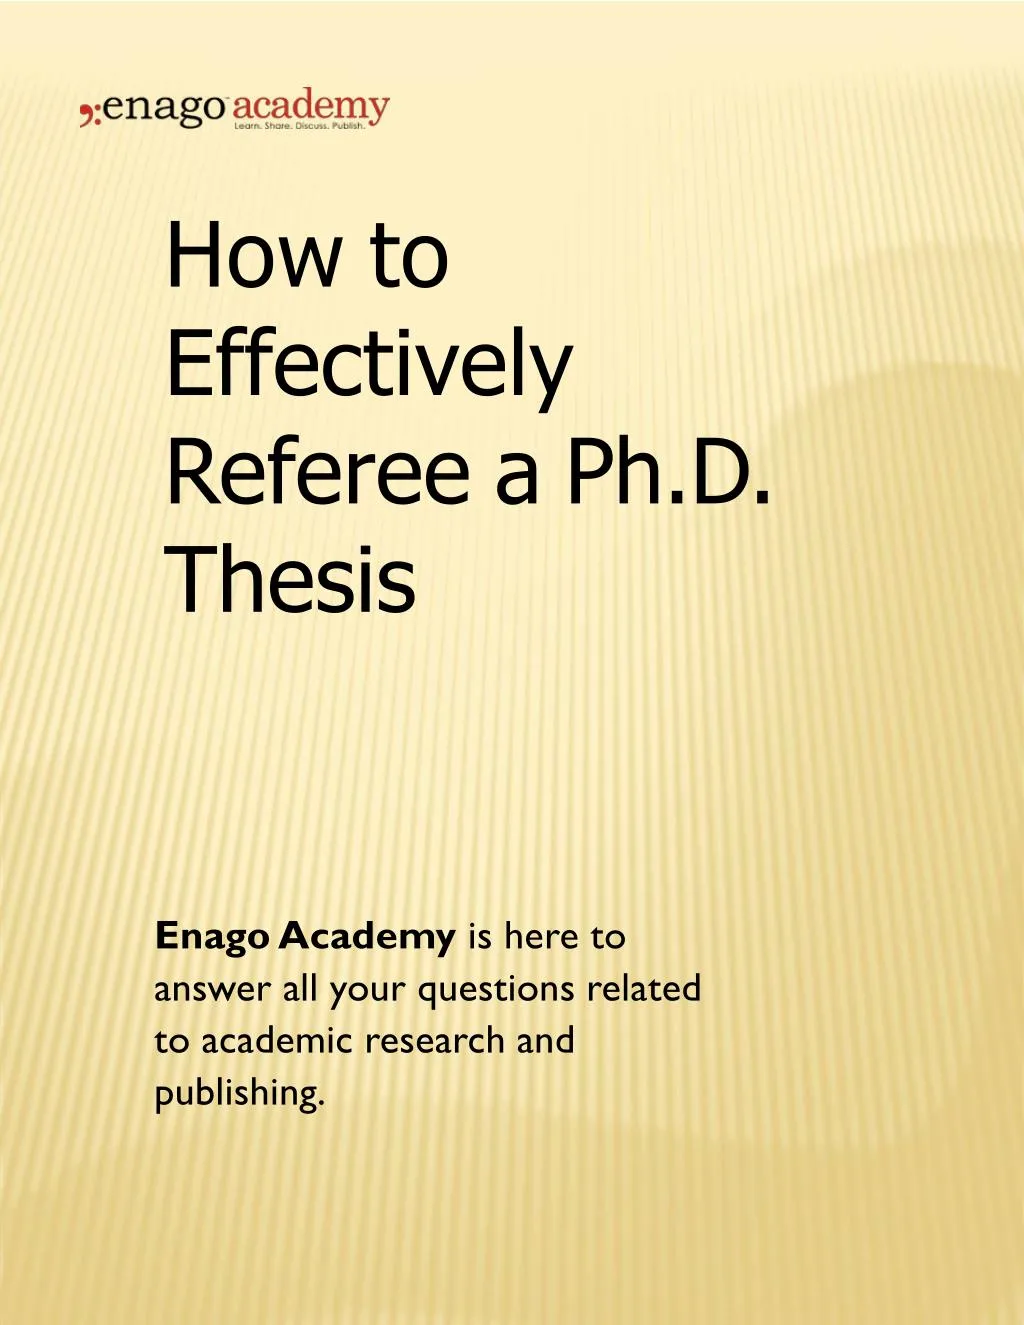 how to effectively referee a ph d thesis